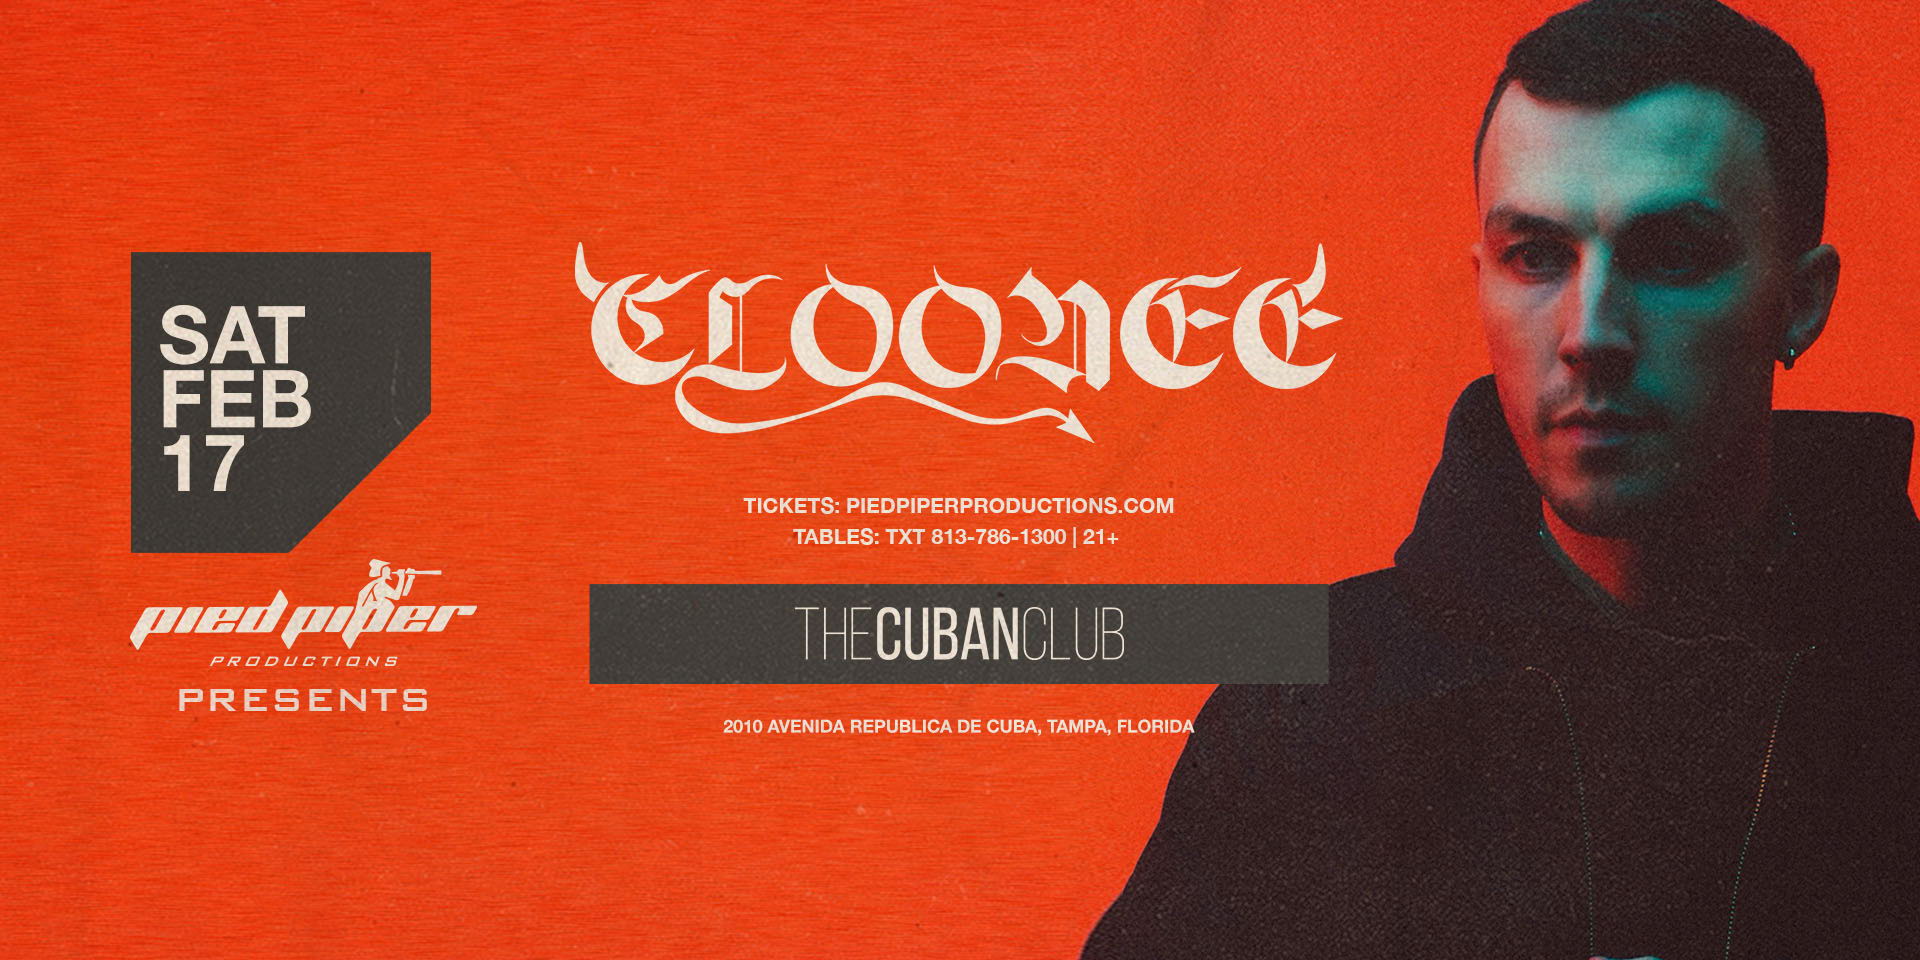 Cloonee at The Cuban Club promotional image